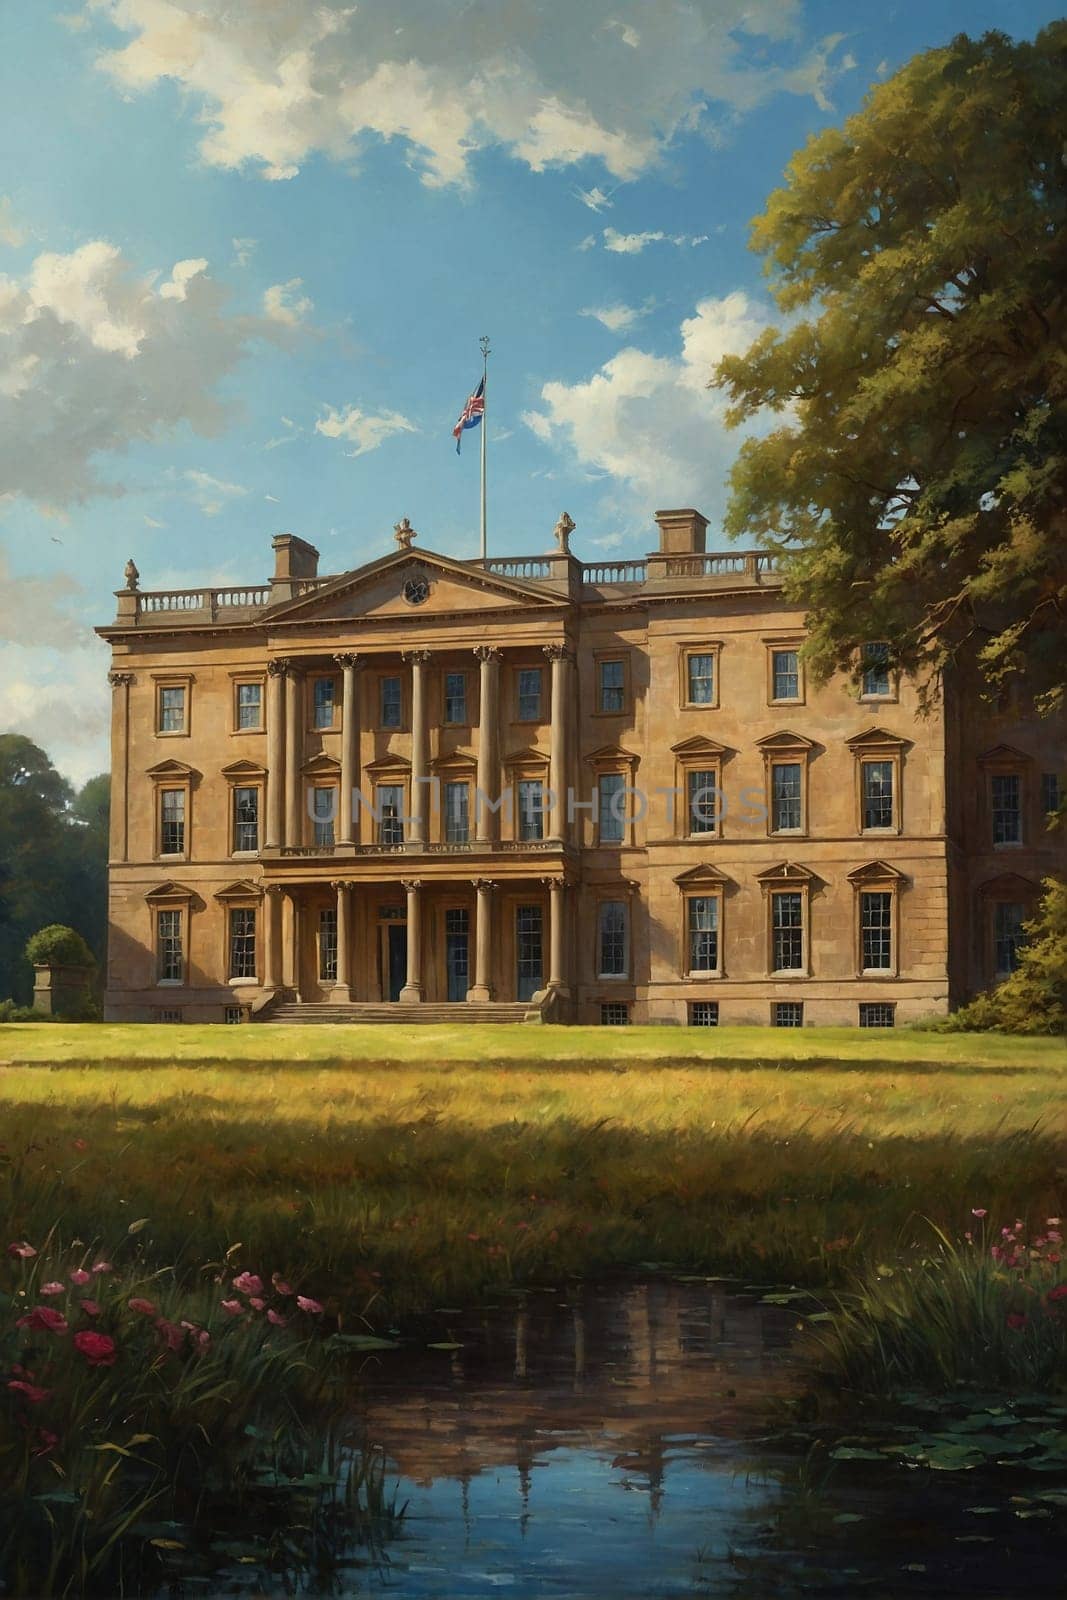 This photo captures a painting that depicts a majestic building overlooking a serene pond.